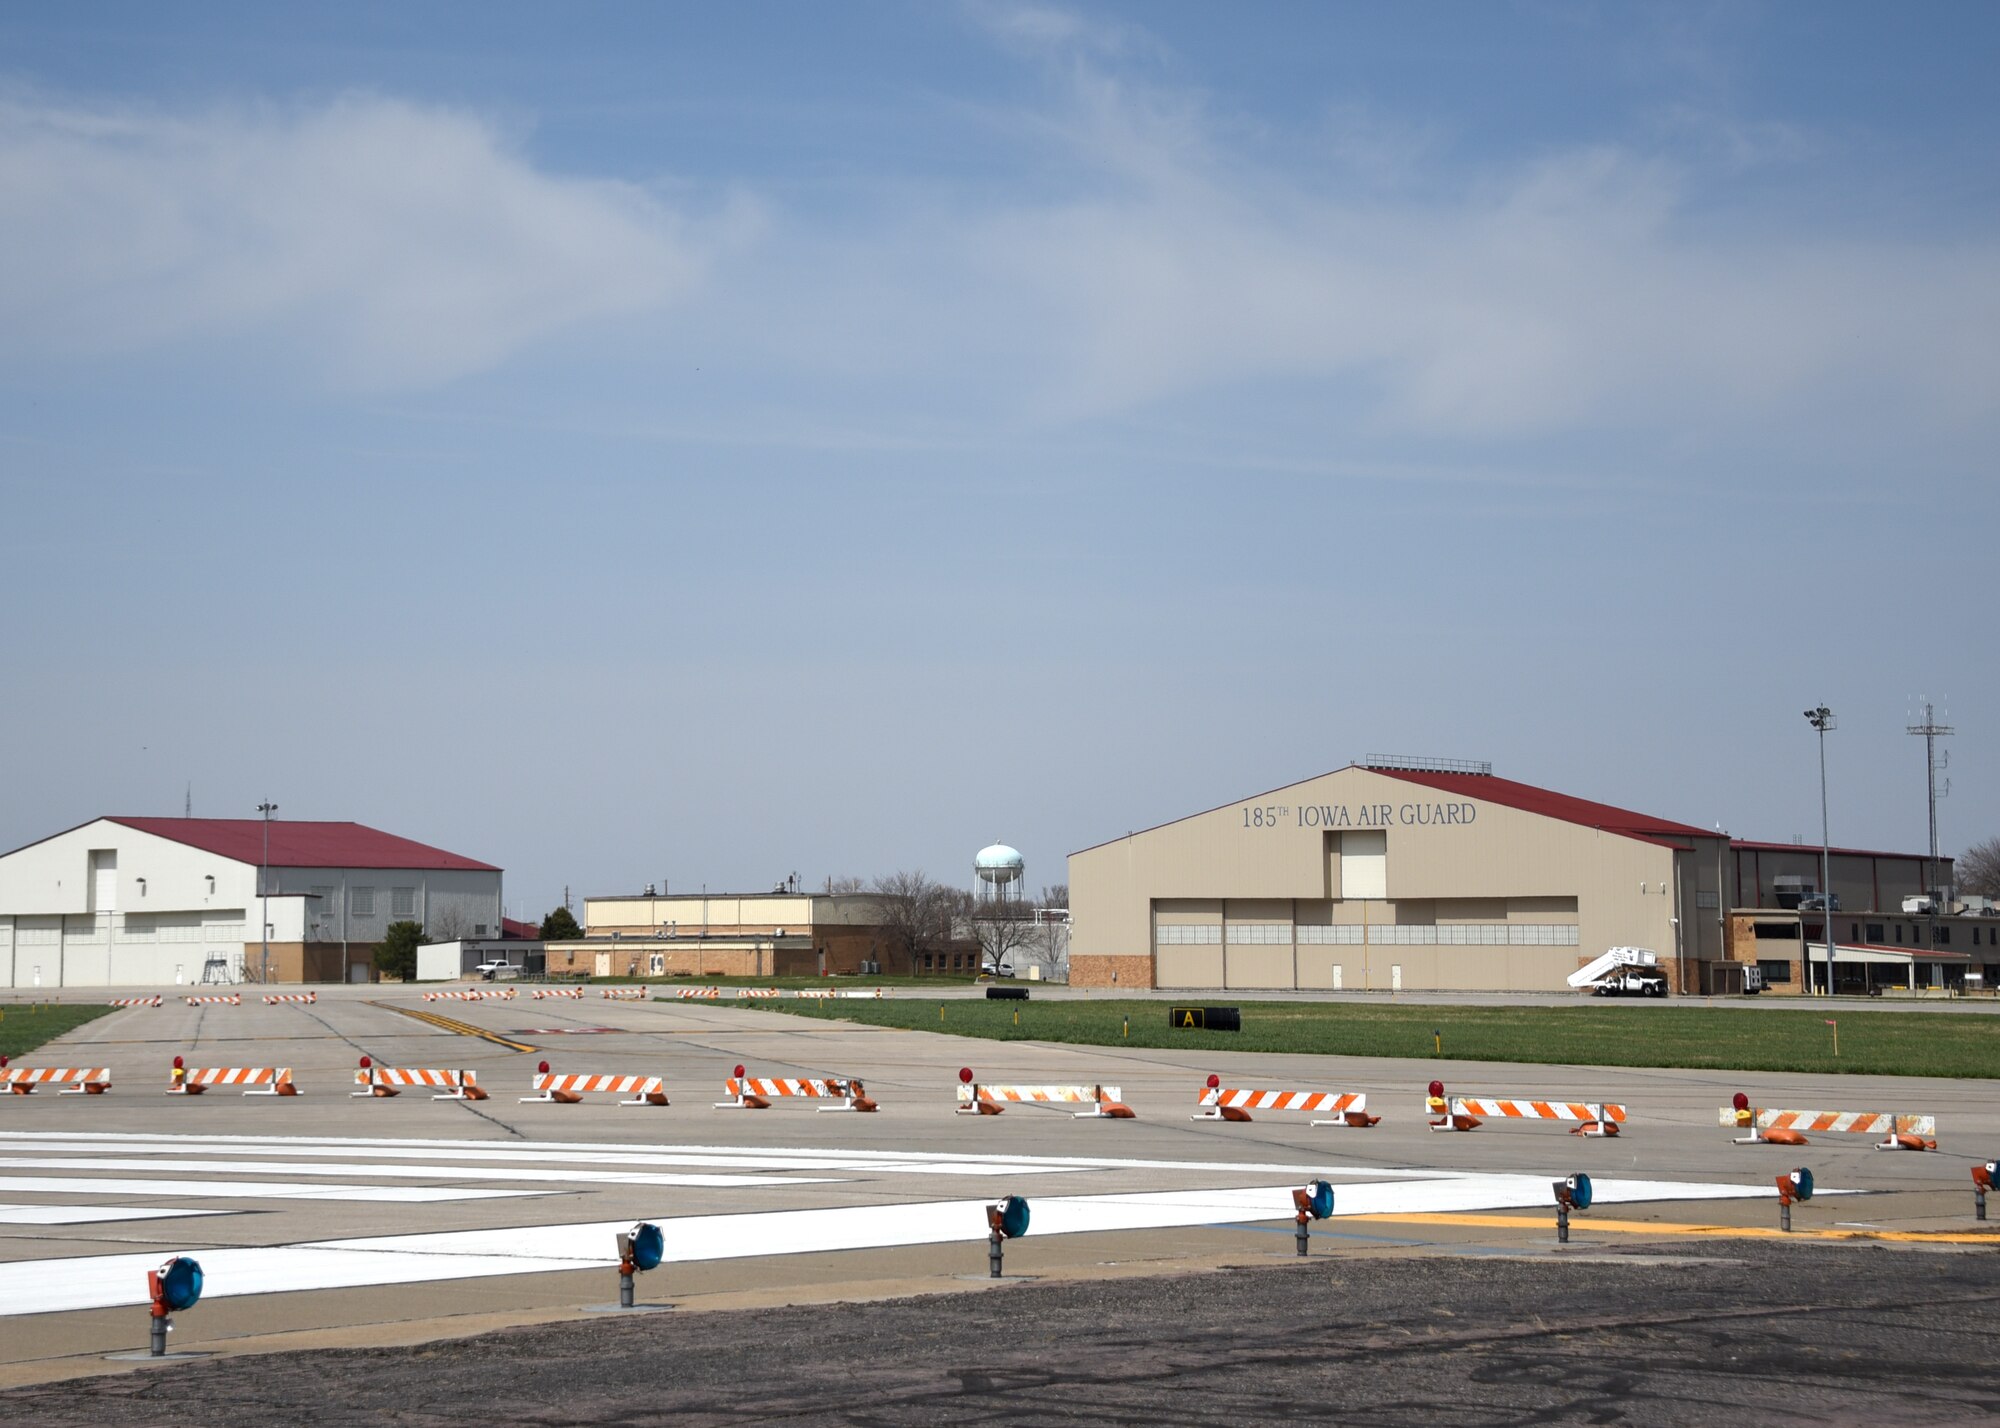 185th ARW continues operations during runway improvements > Air